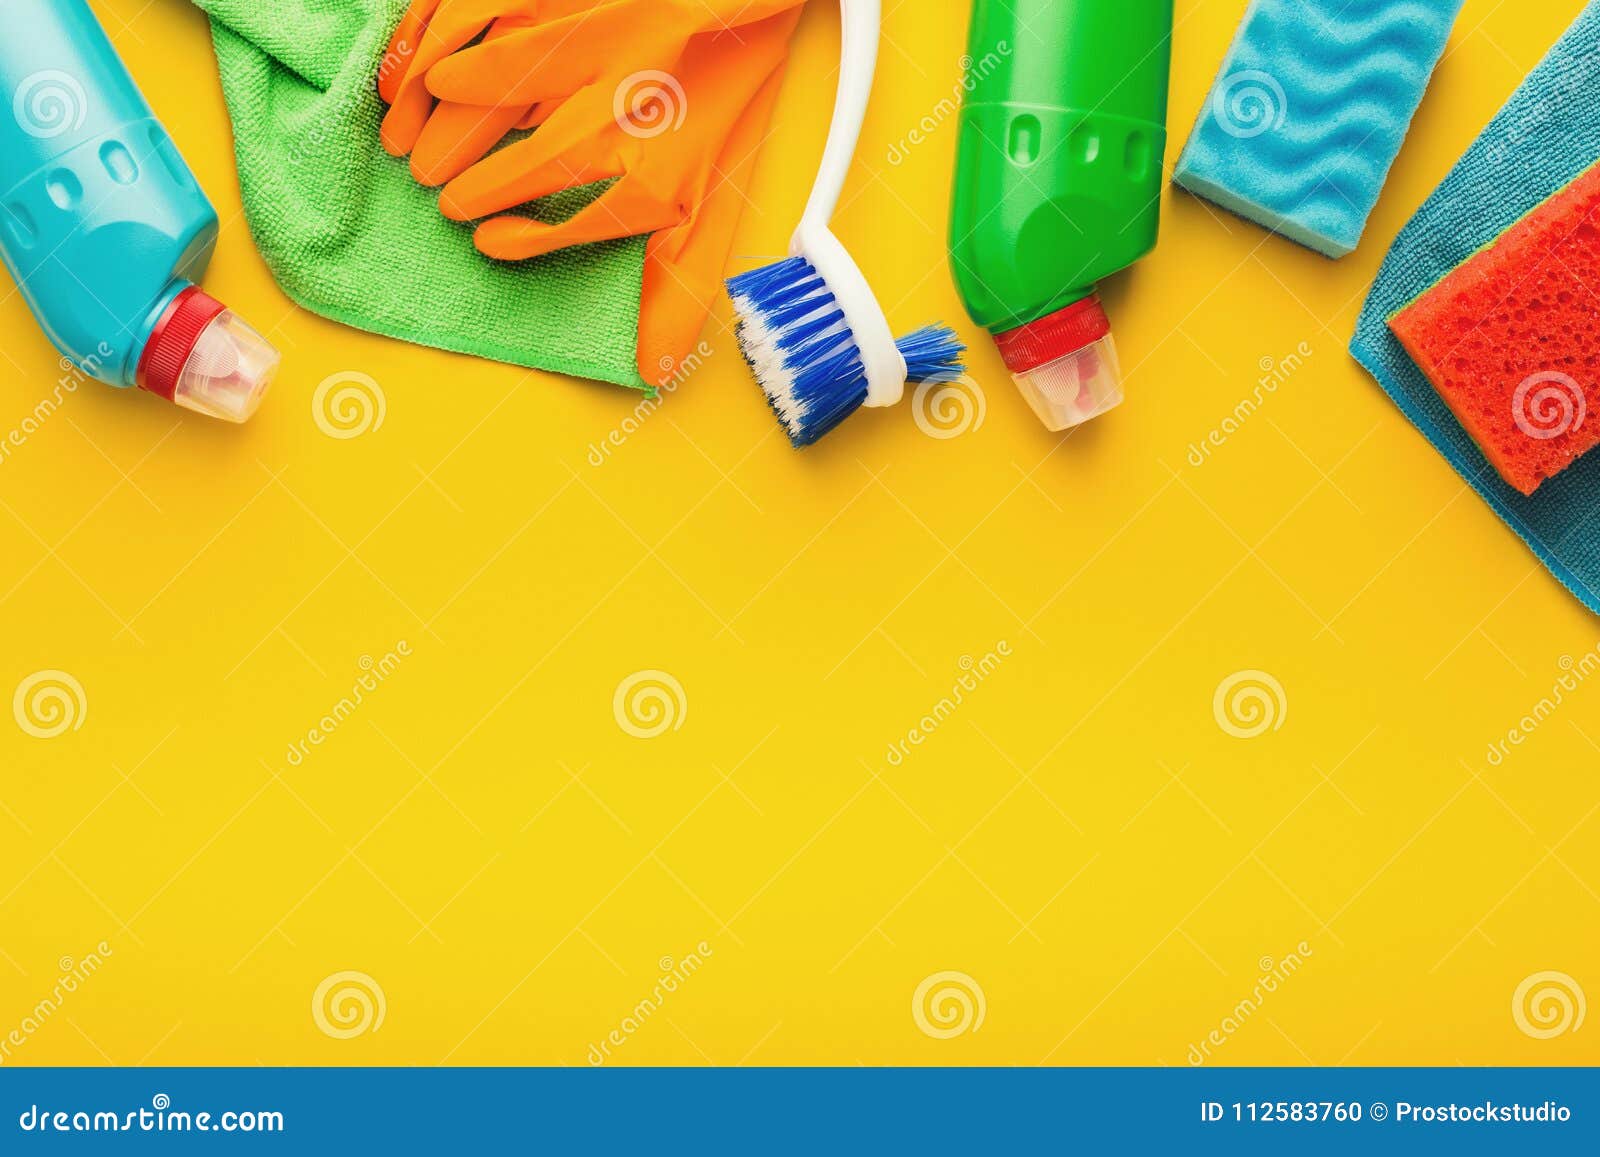 https://thumbs.dreamstime.com/z/various-cleaning-supplies-housekeeping-background-spring-cleaning-background-assortment-colorful-spray-detergents-sponges-rags-112583760.jpg